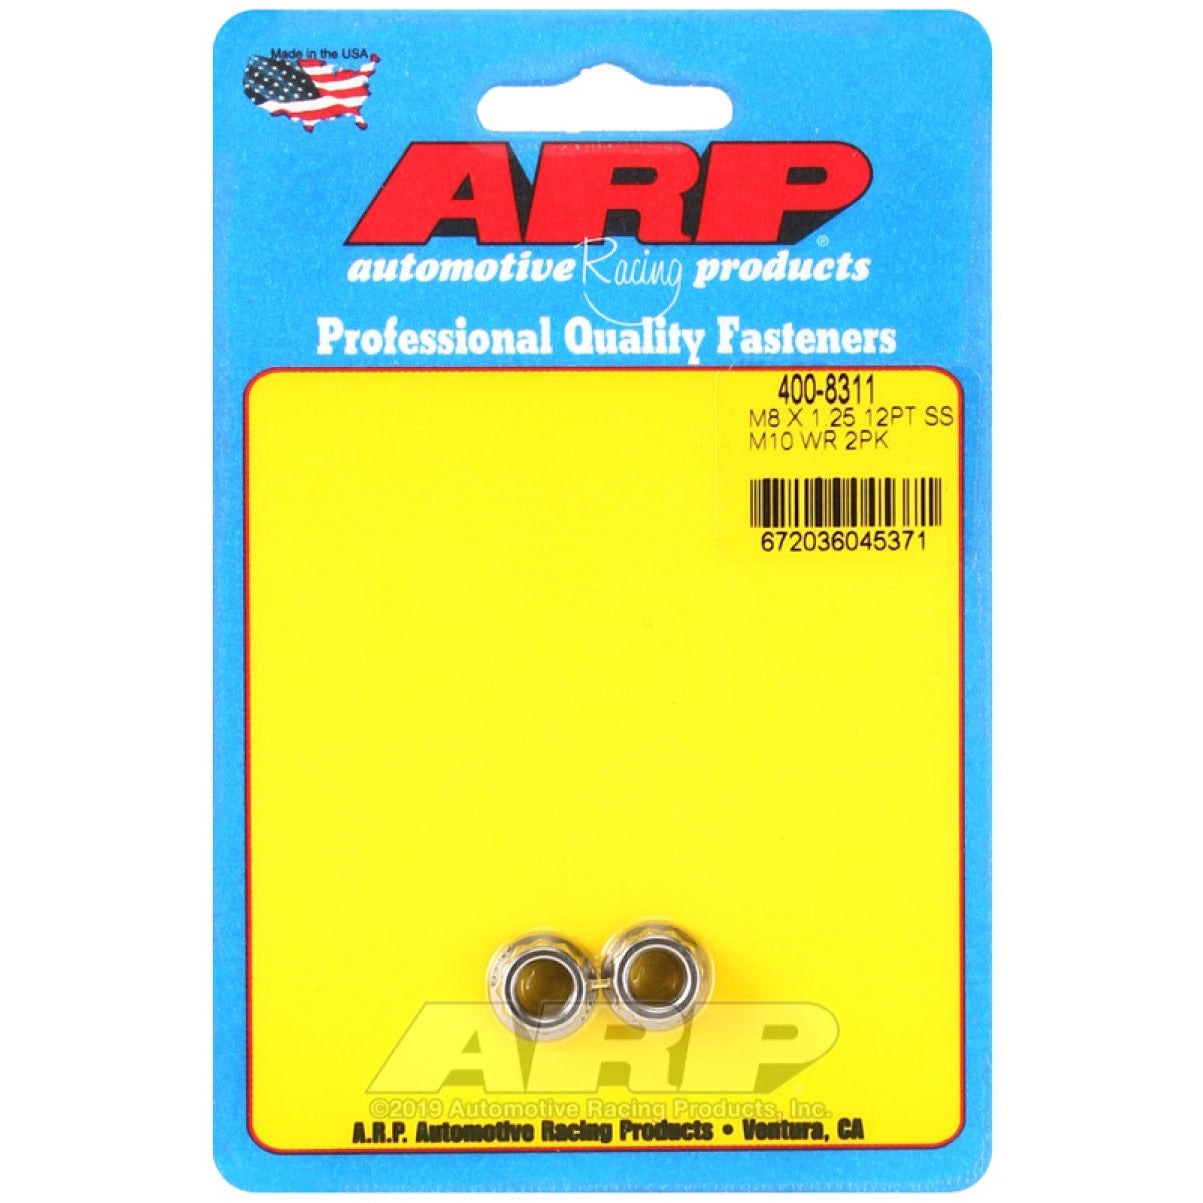 ARP M8 x 1.25 M10 WR 12pt Stainless Steel Nut Kit ARP Hardware Kits - Other